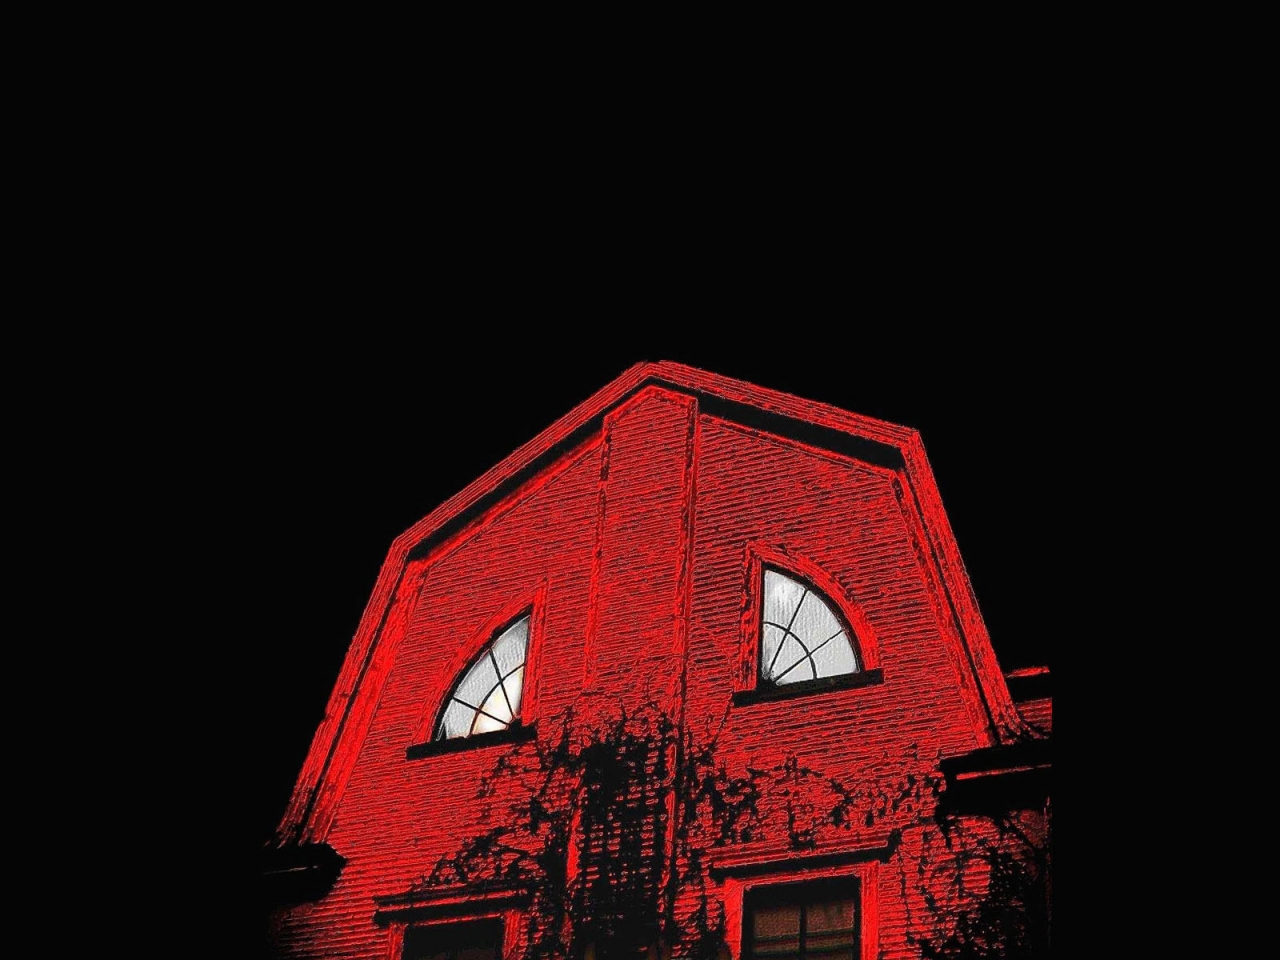 The Amityville Horror Lost Tapes for 1280 x 960 resolution